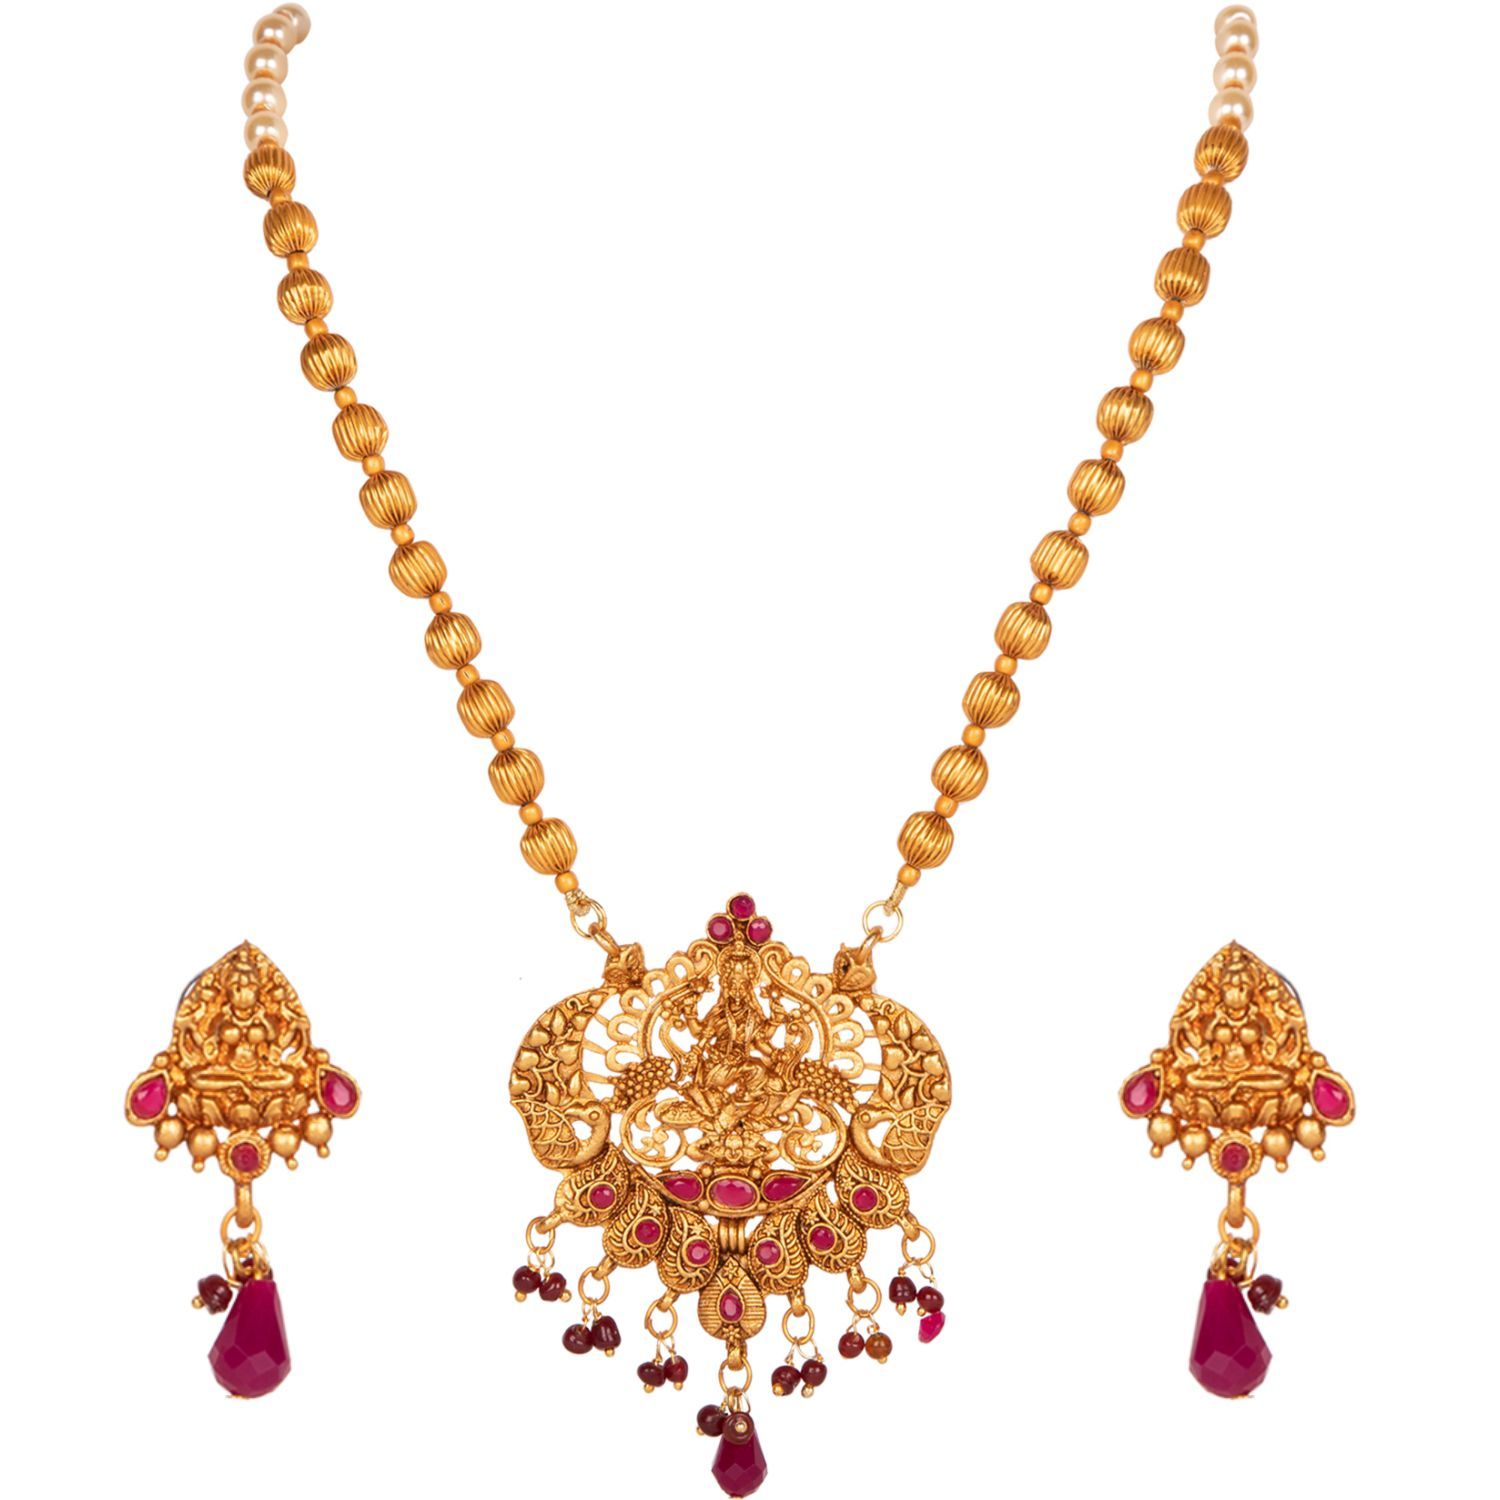 Anika S Creation Exclusive South Indian High Gold Plated Temple Jewellery Set Design Of Lord Lakshmi Buy Anika S Creation Exclusive South Indian High Gold Plated Temple Jewellery Set Design Of Lord Lakshmi Online,Simple Wood Carving Designs Flower